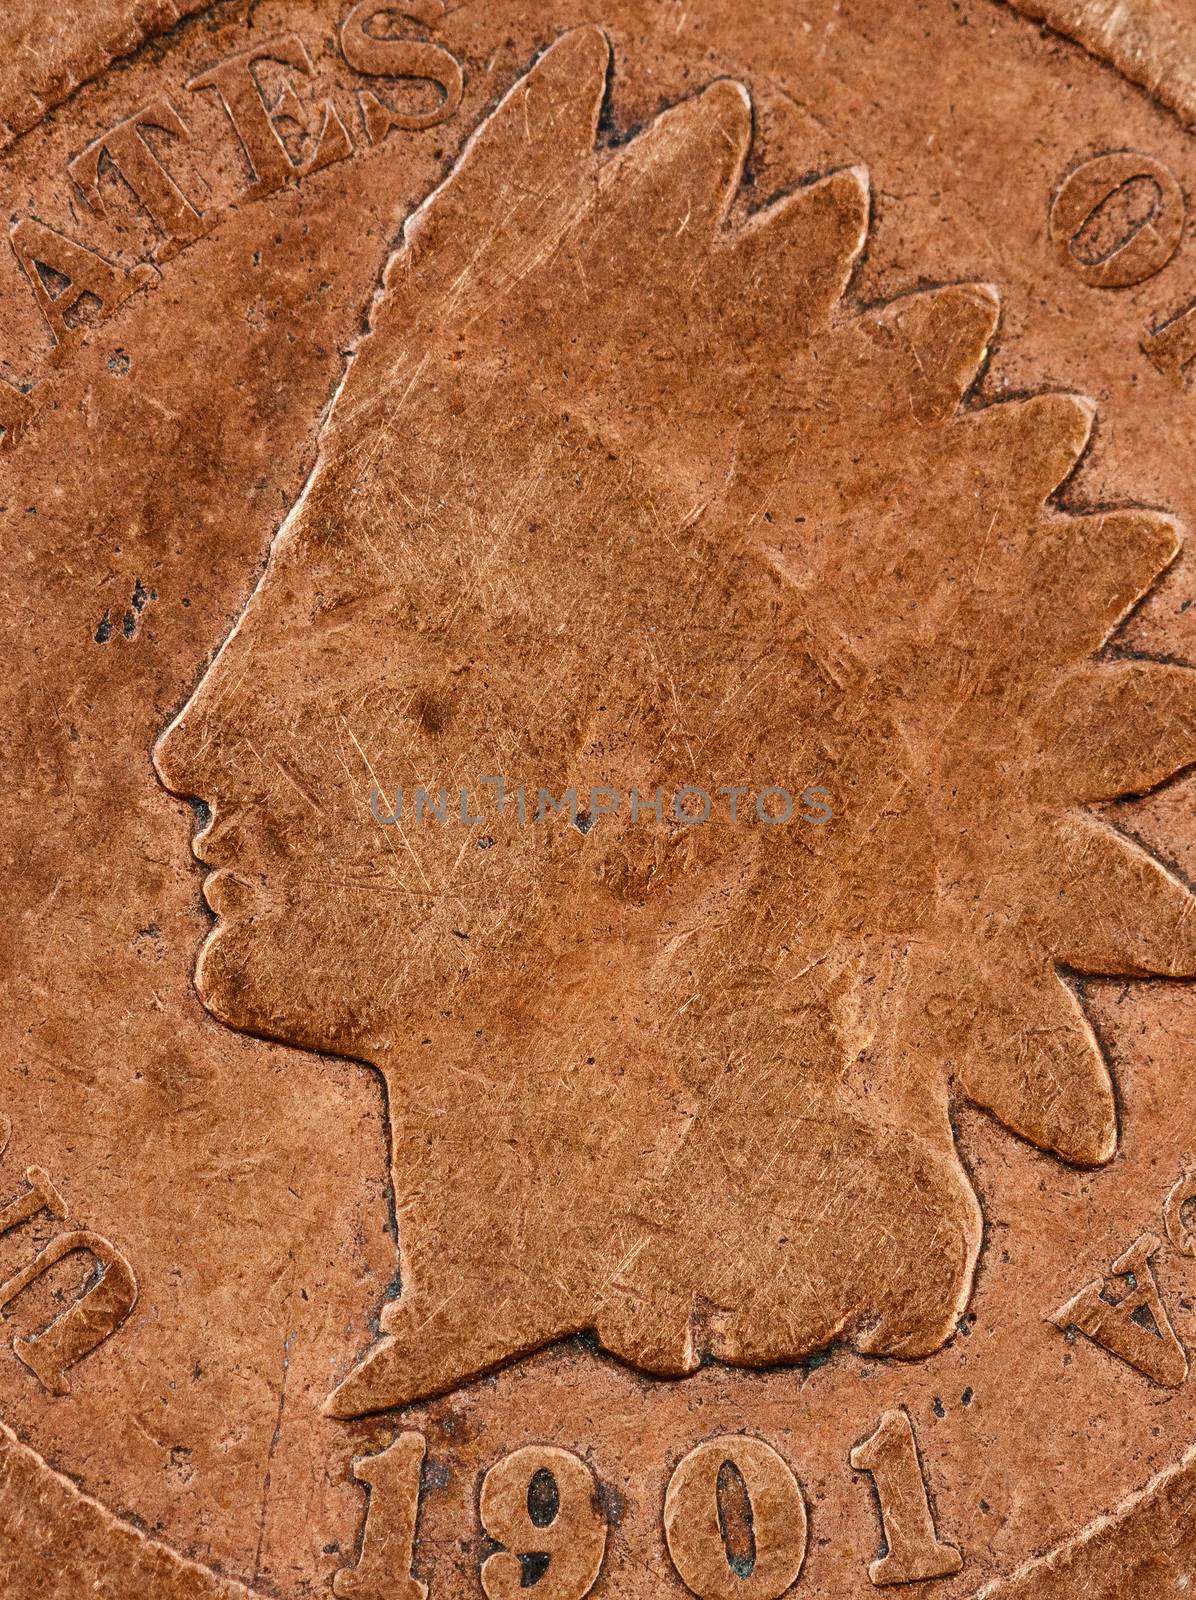 Macro view of toned copper metal coin that is aged 